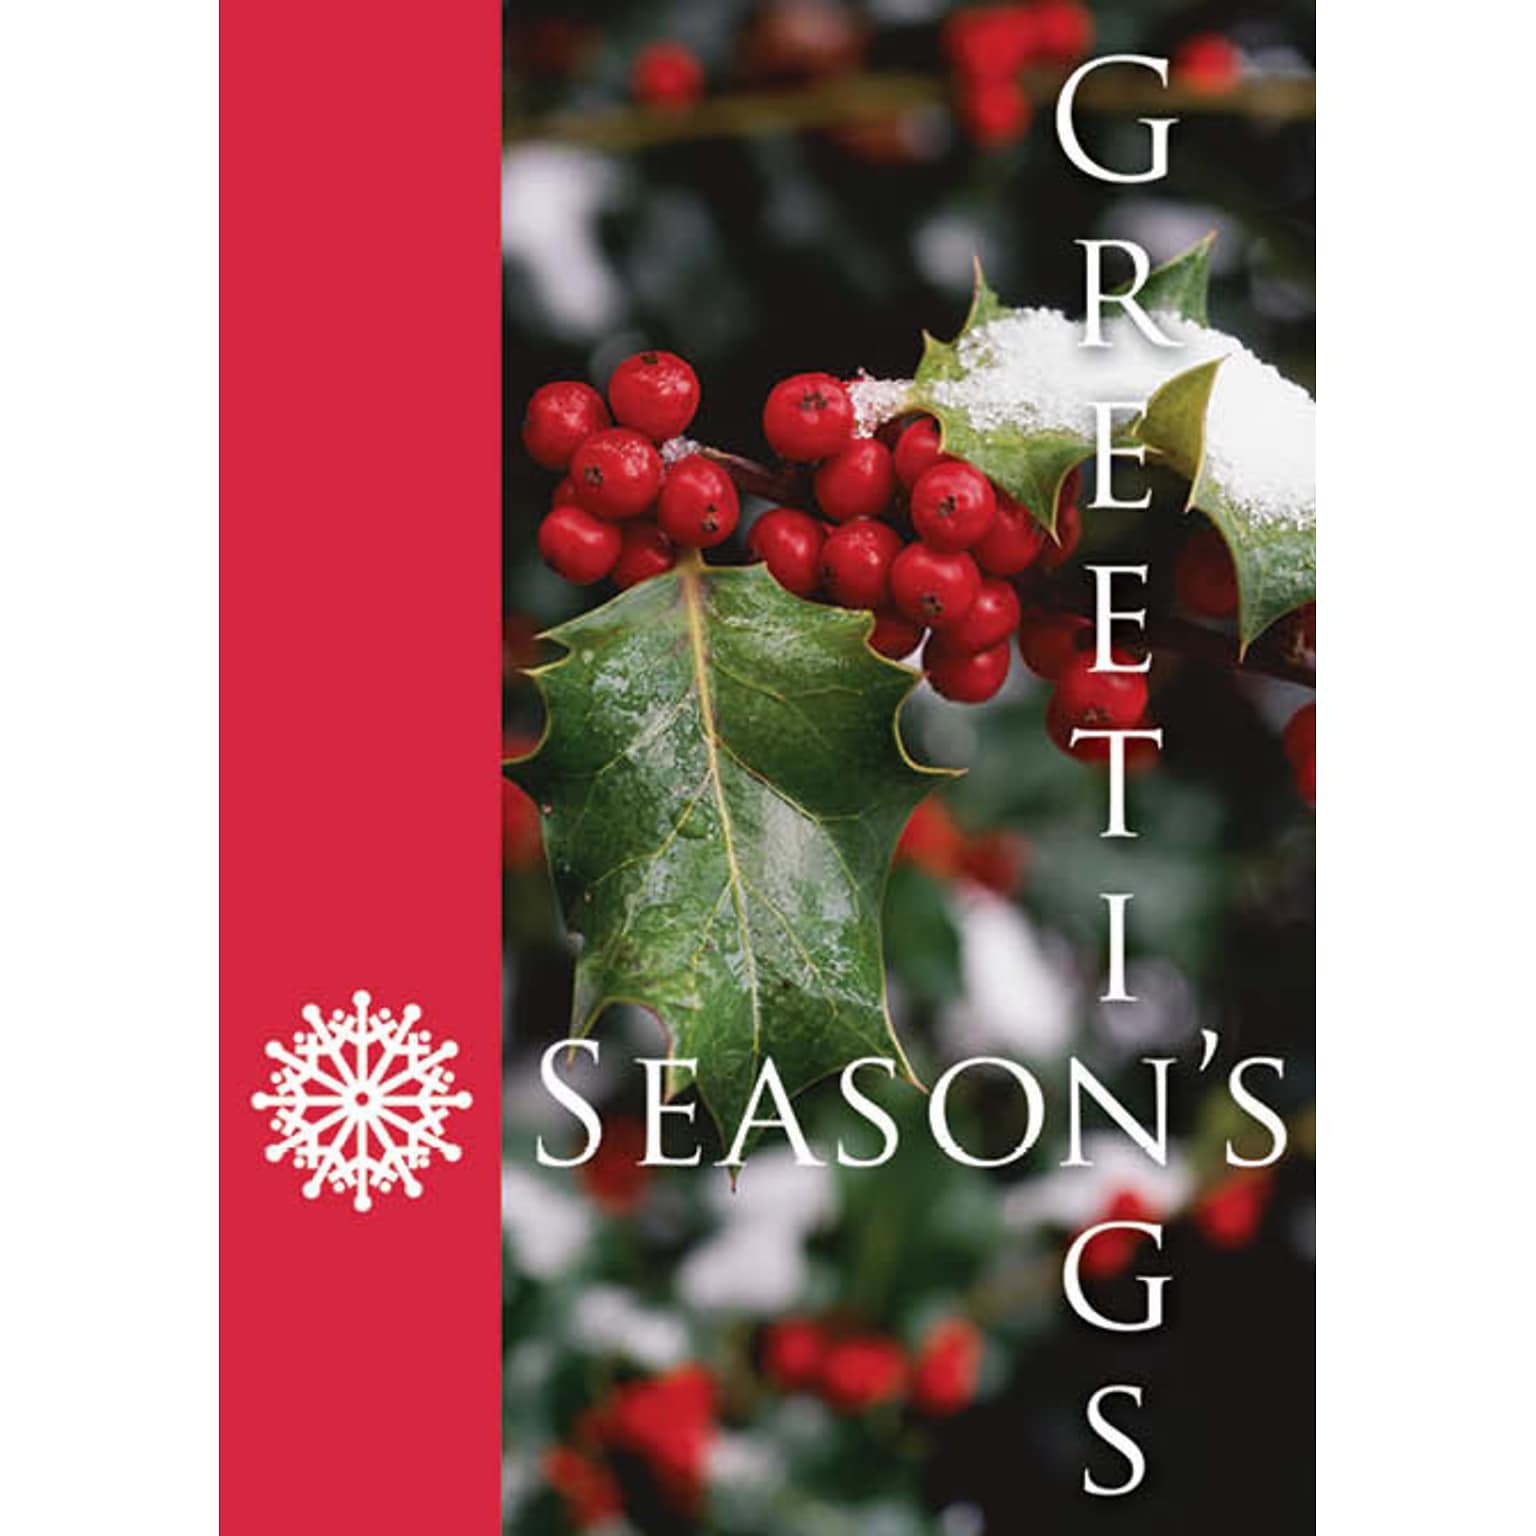 Seasons Greetings Leaves & Berries Holiday Greeting Cards, With A7 Envelopes, 7 x 5, 25 Cards per Set